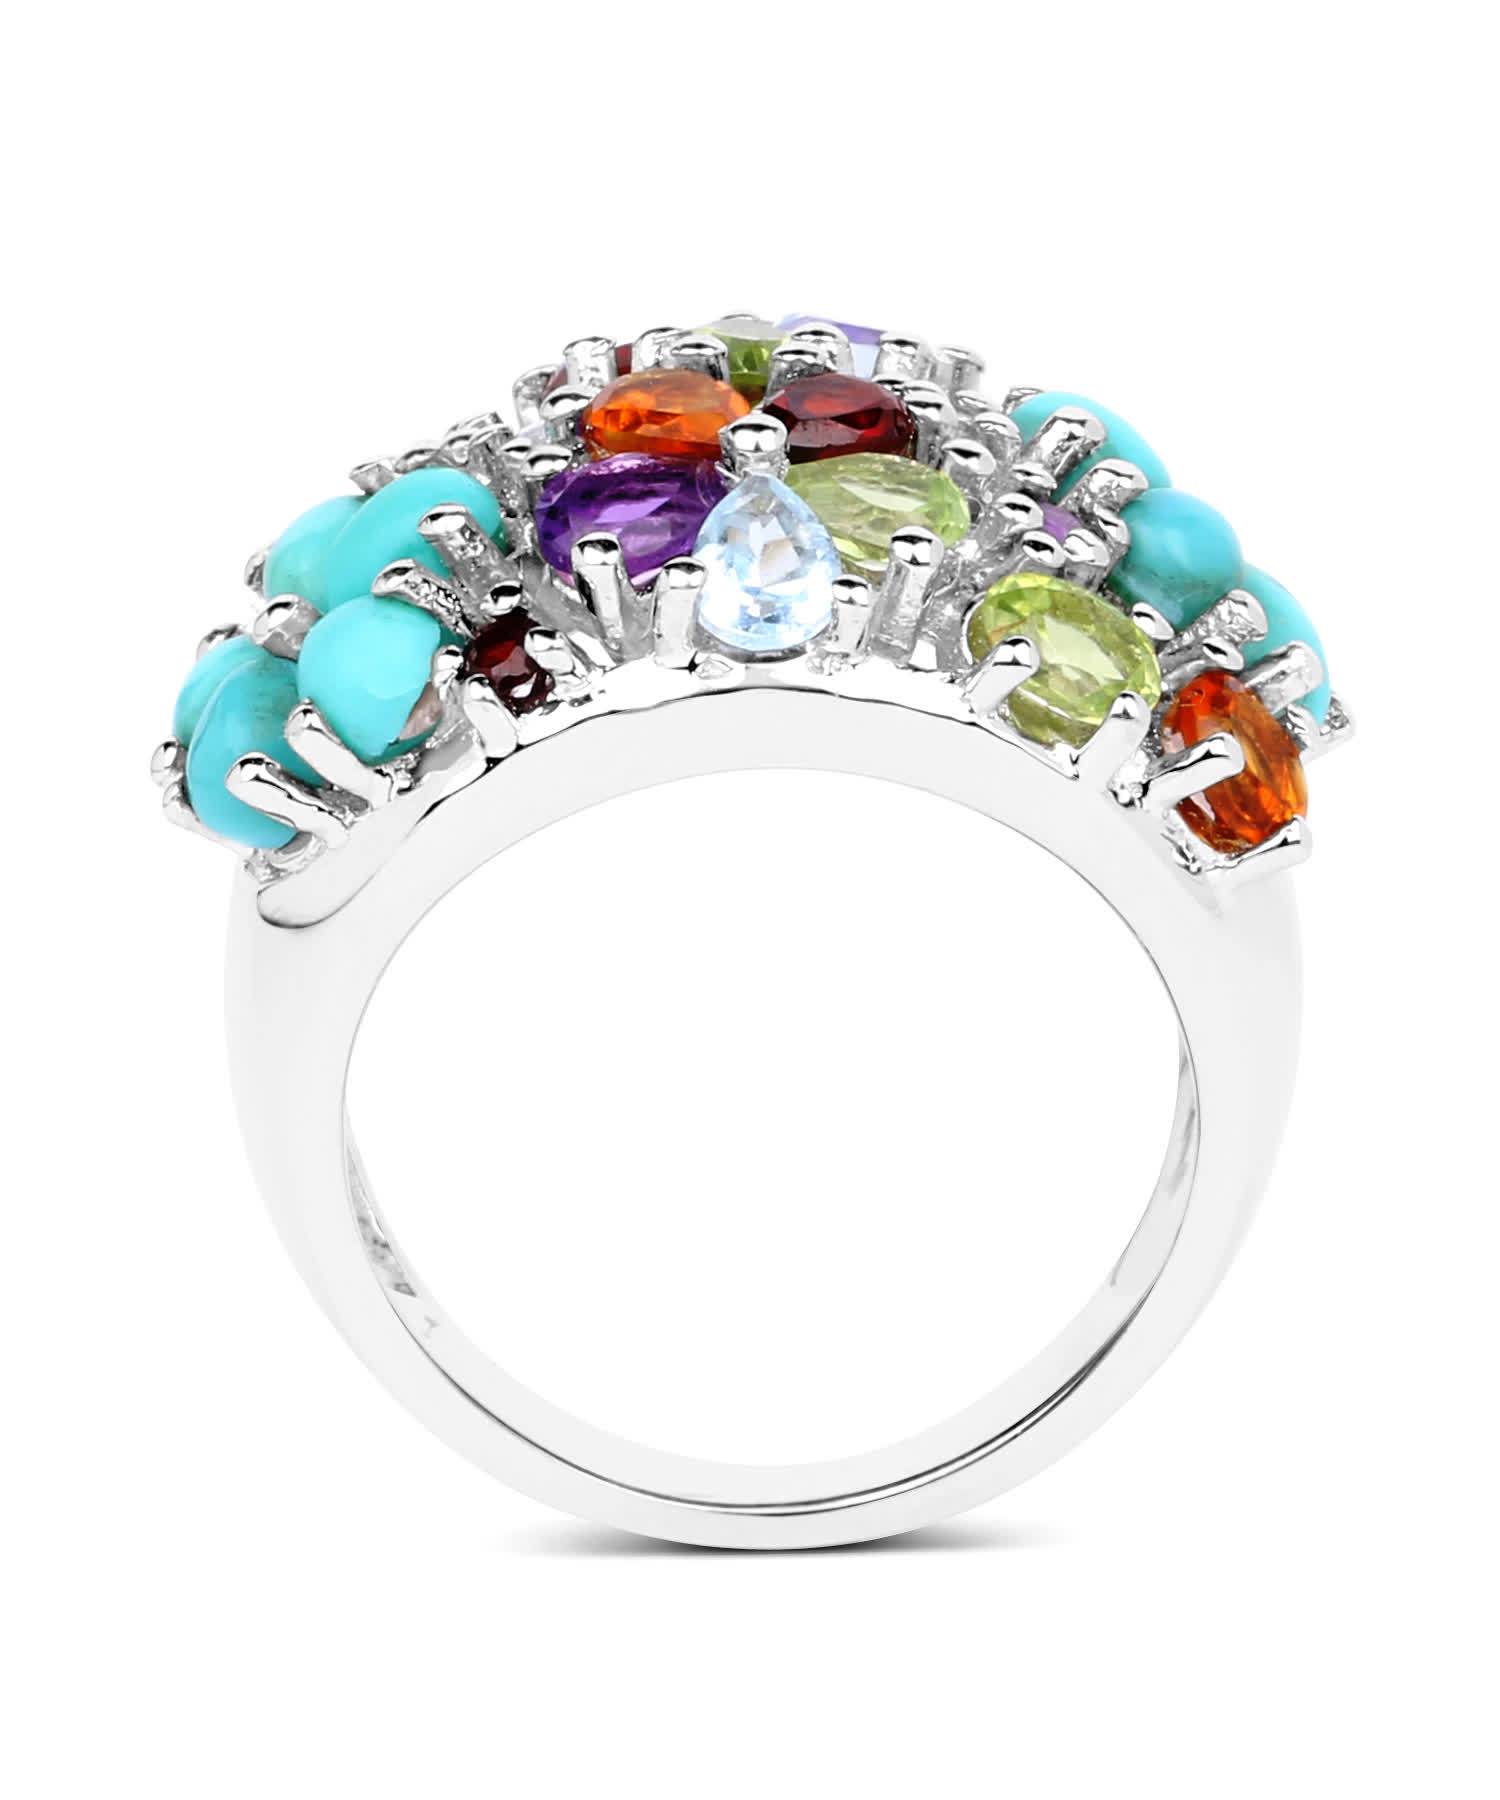 4.03ctw Natural Multi-Color Mixed Gems Rhodium Plated 925 Sterling Silver Flower Right Hand Ring View 2